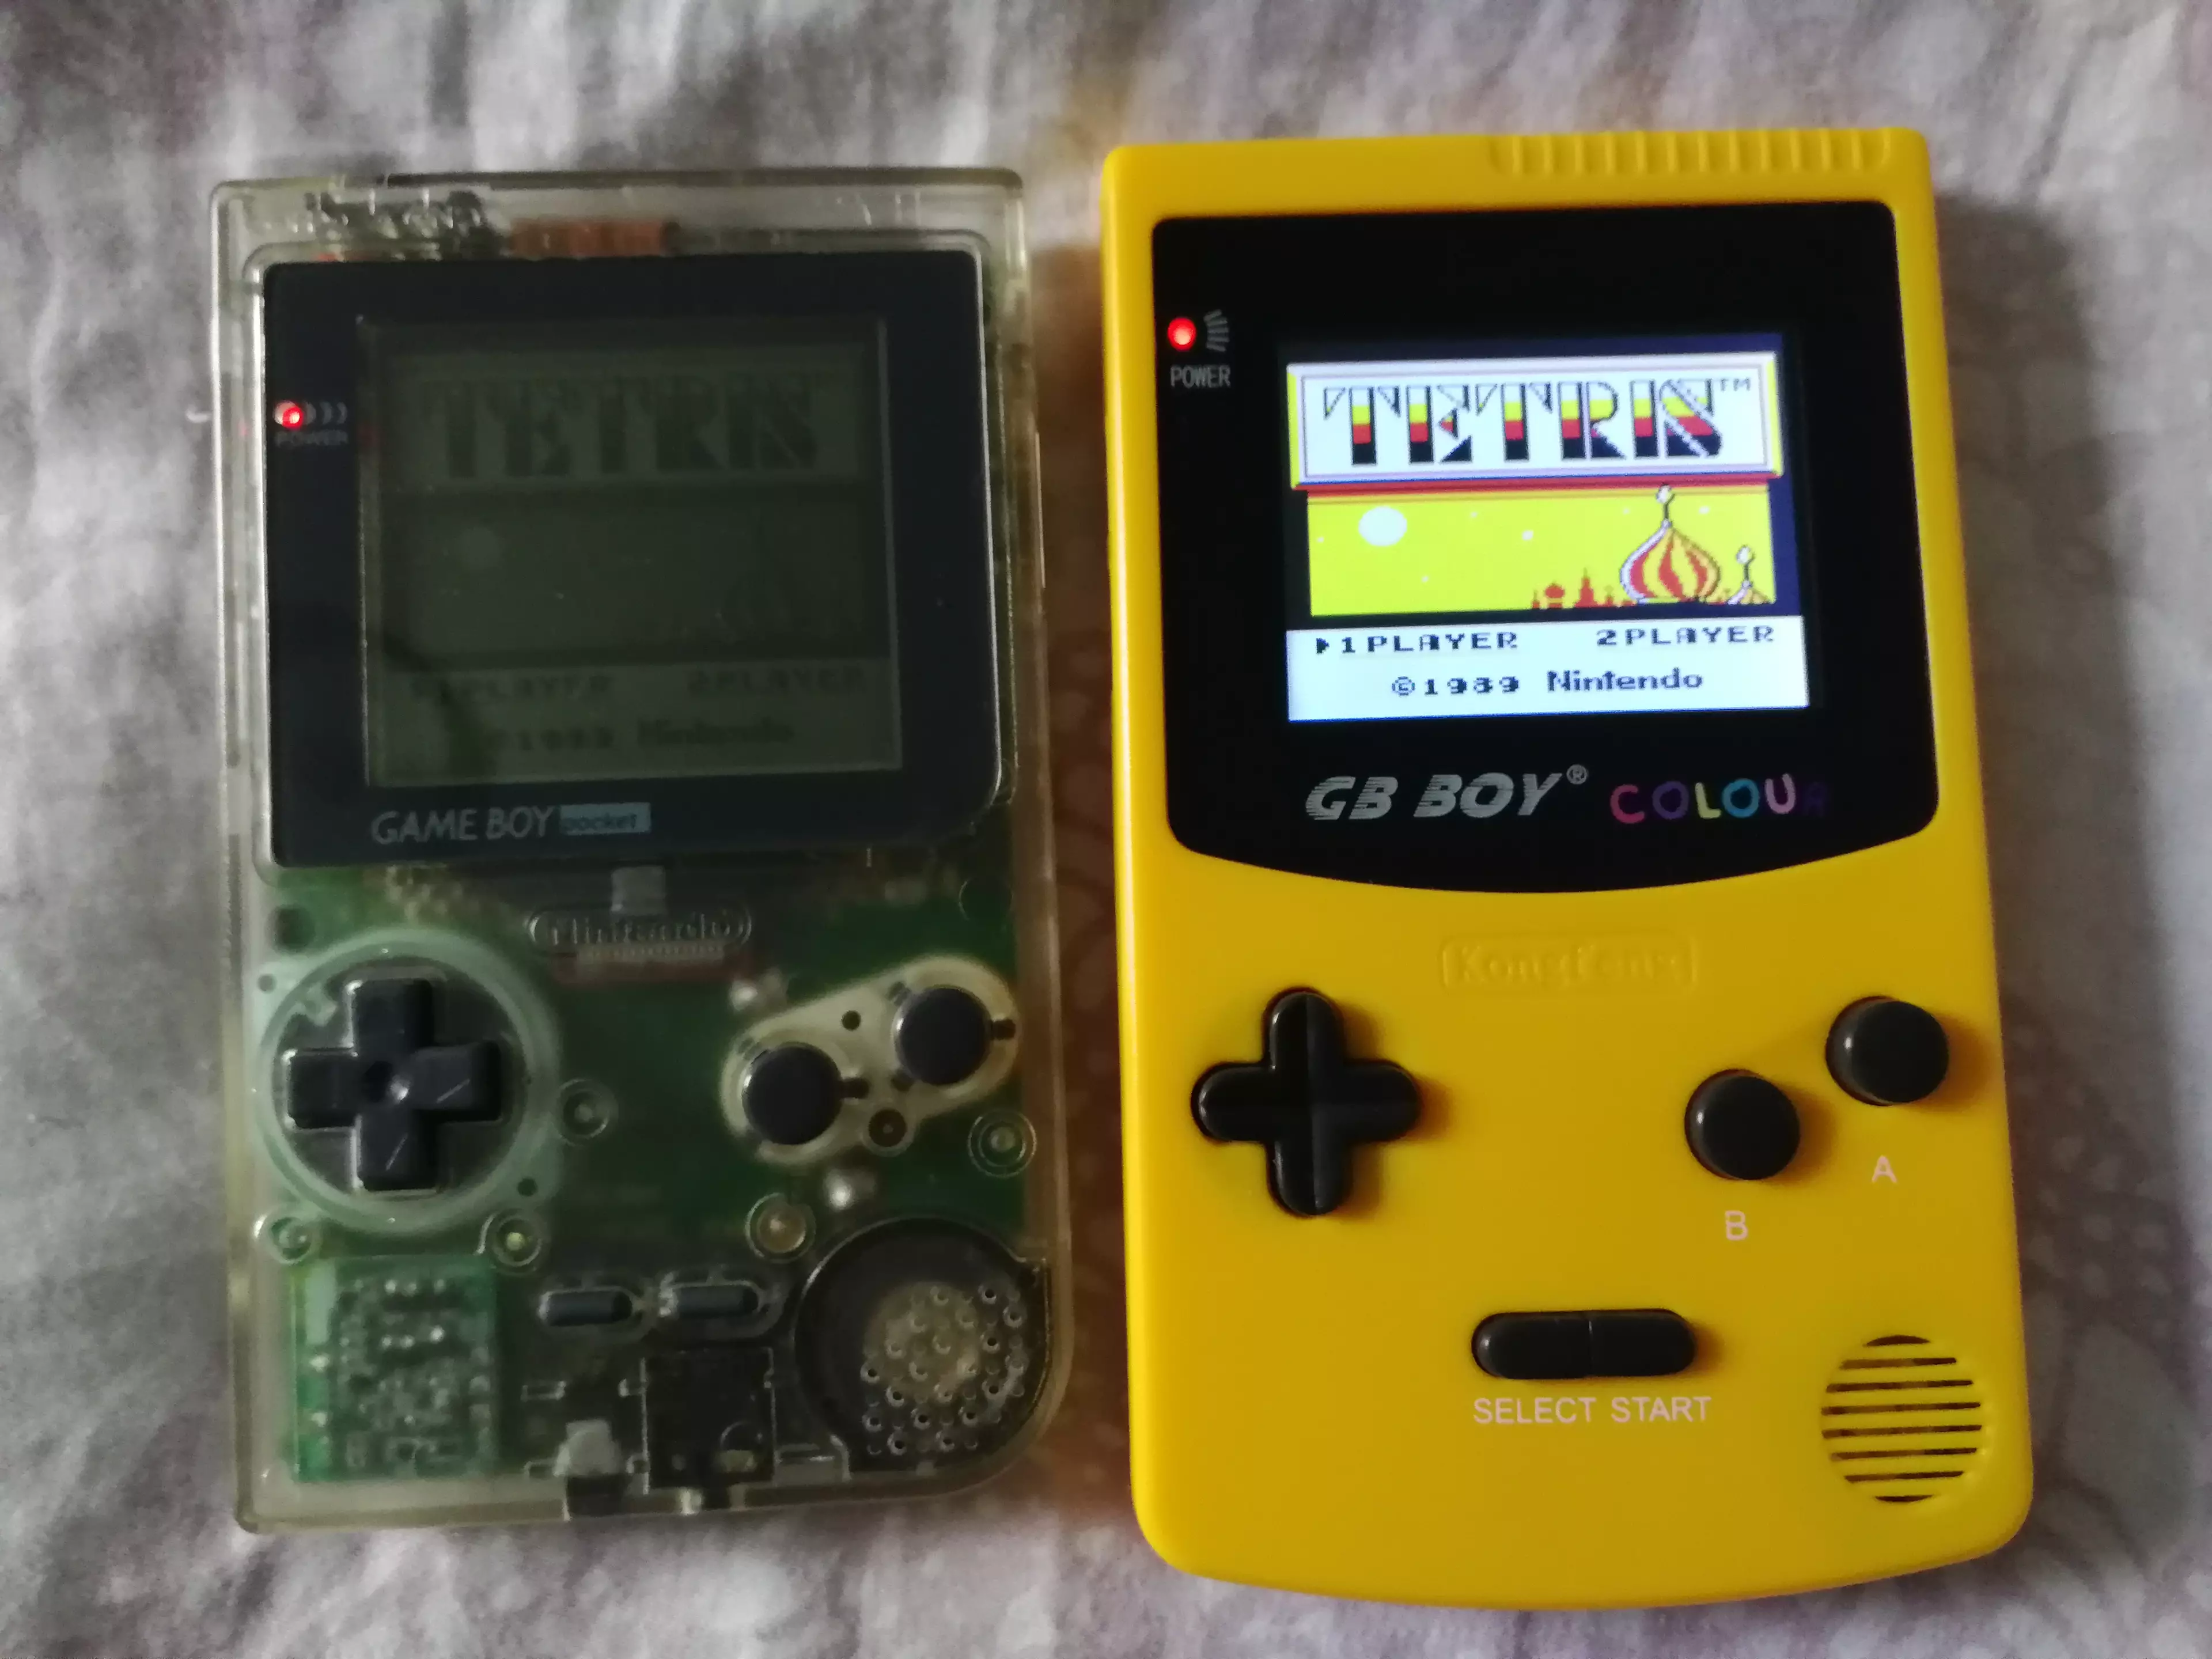 The GB Boy Colour's screen compared to the monochrome Game Boy Pocket /